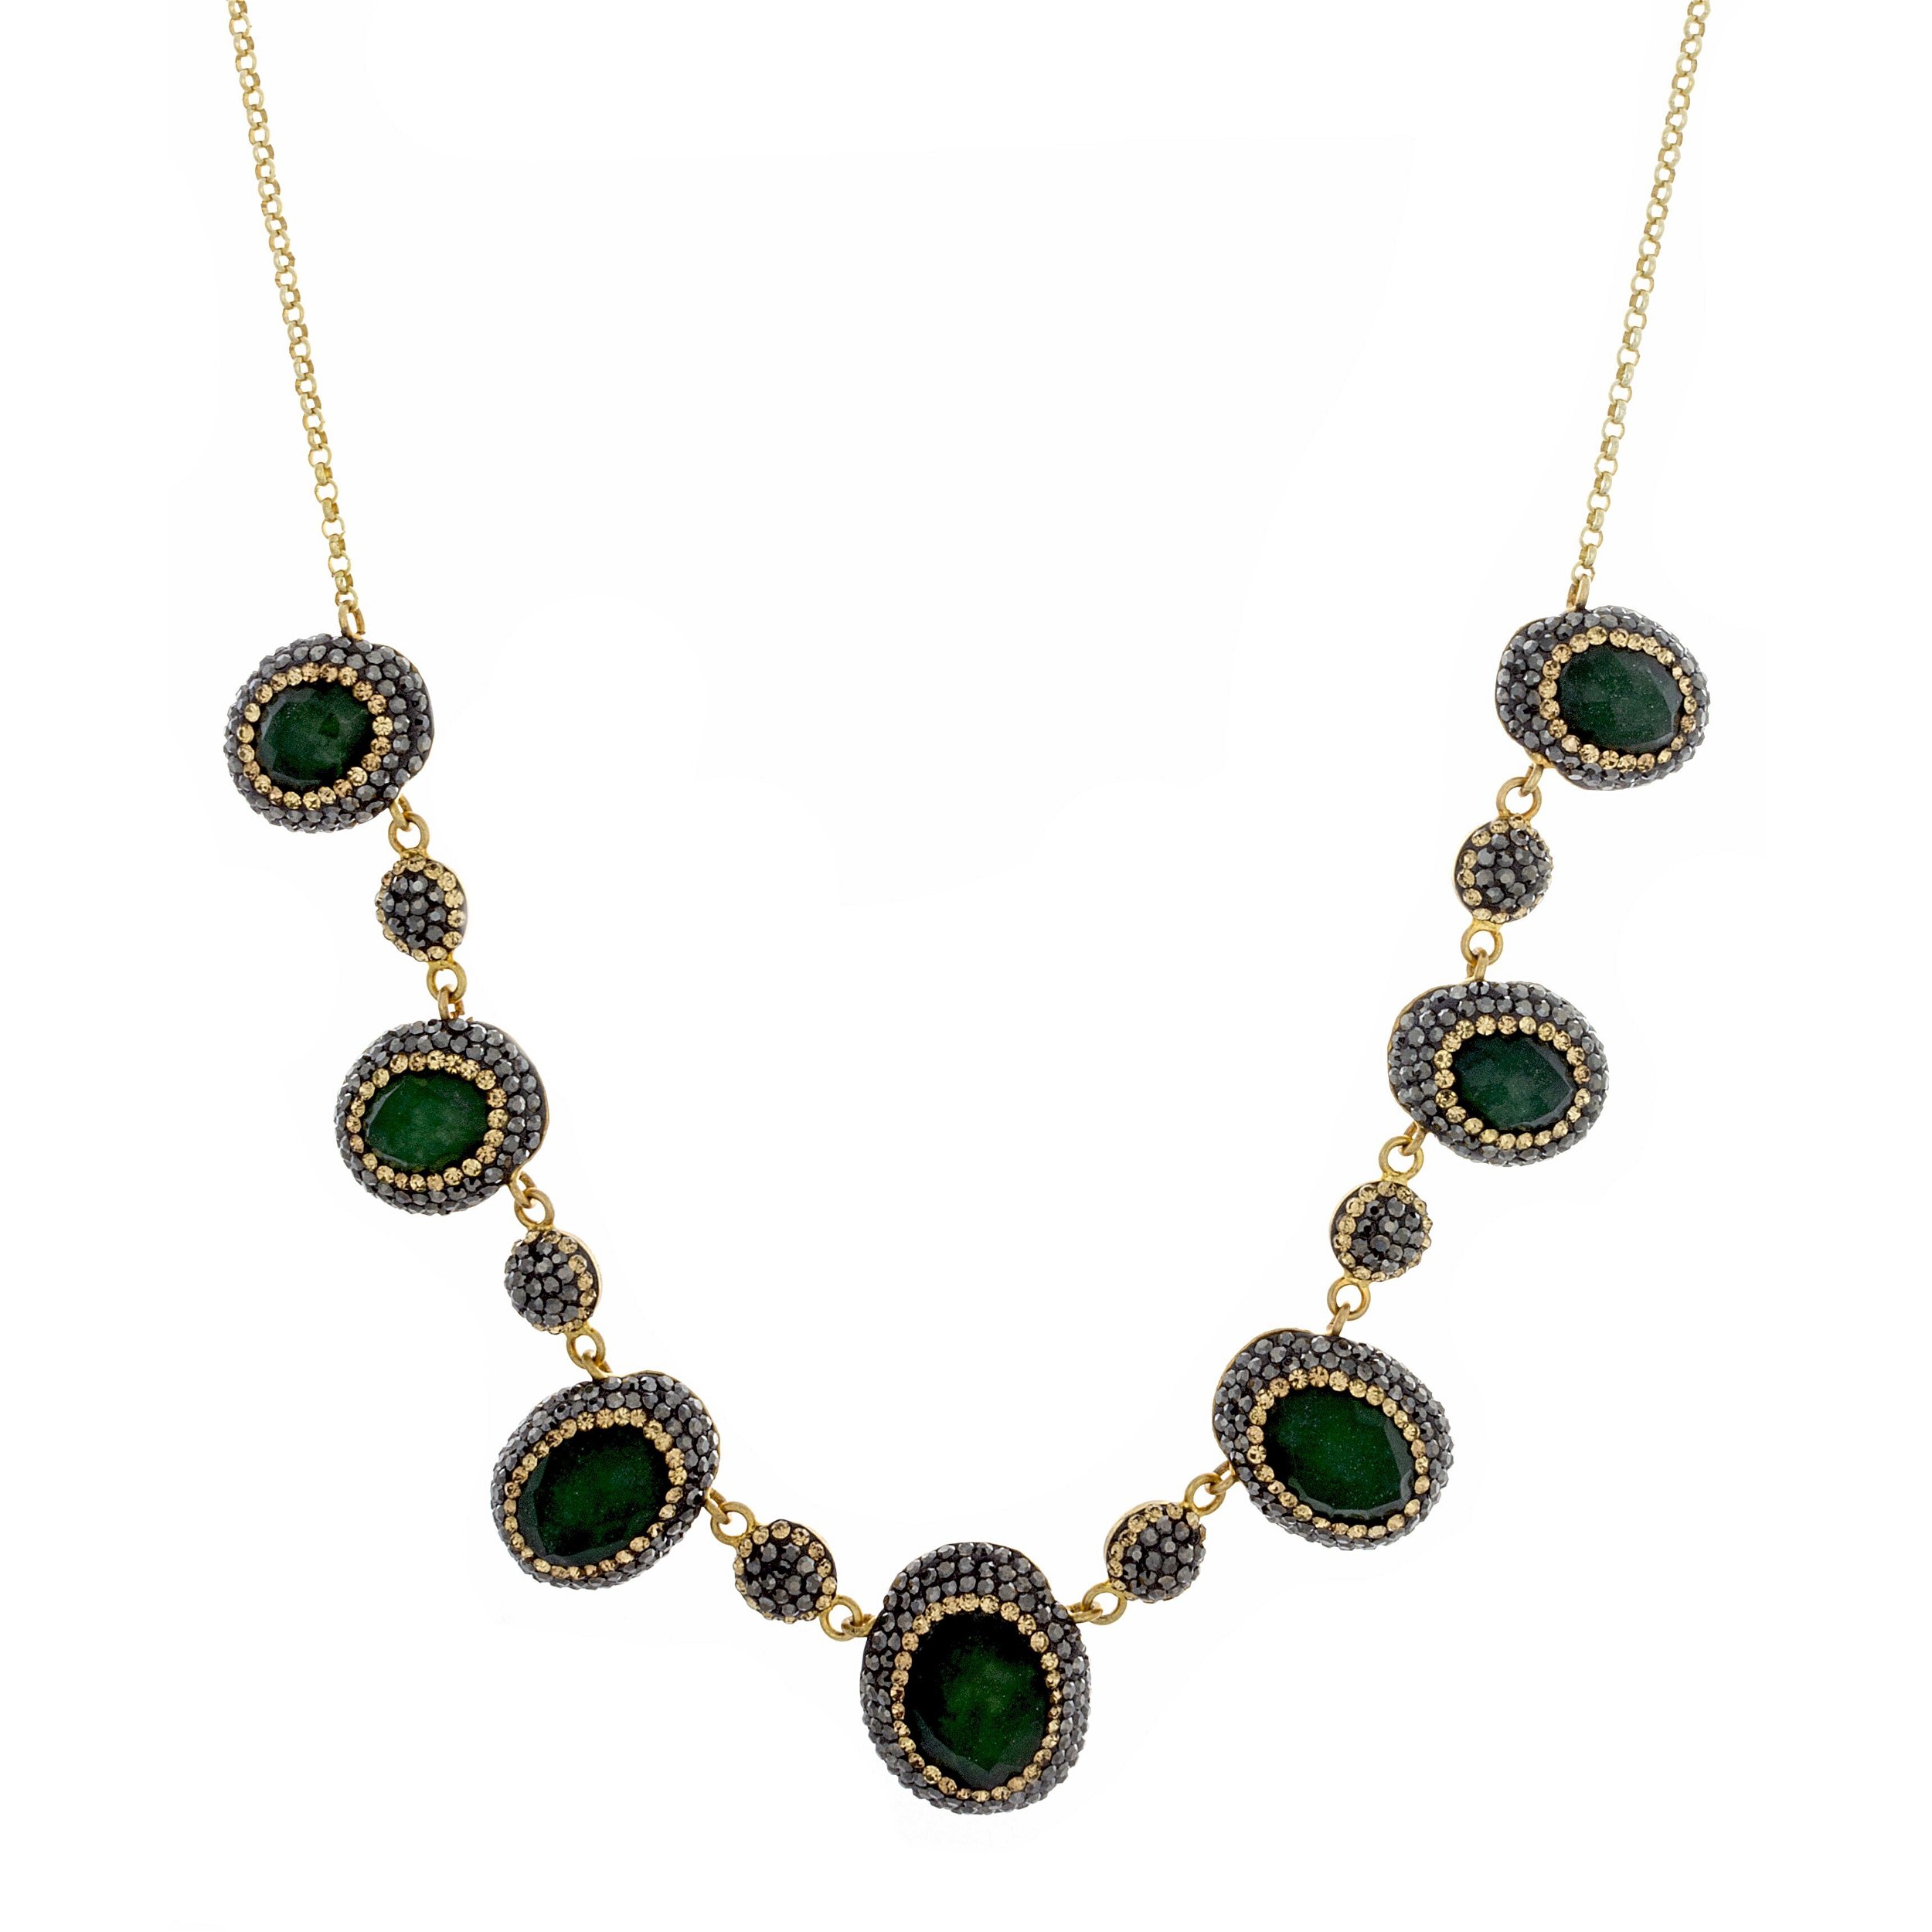 Emerald Necklace With Marcasite And Swarovski Crystals